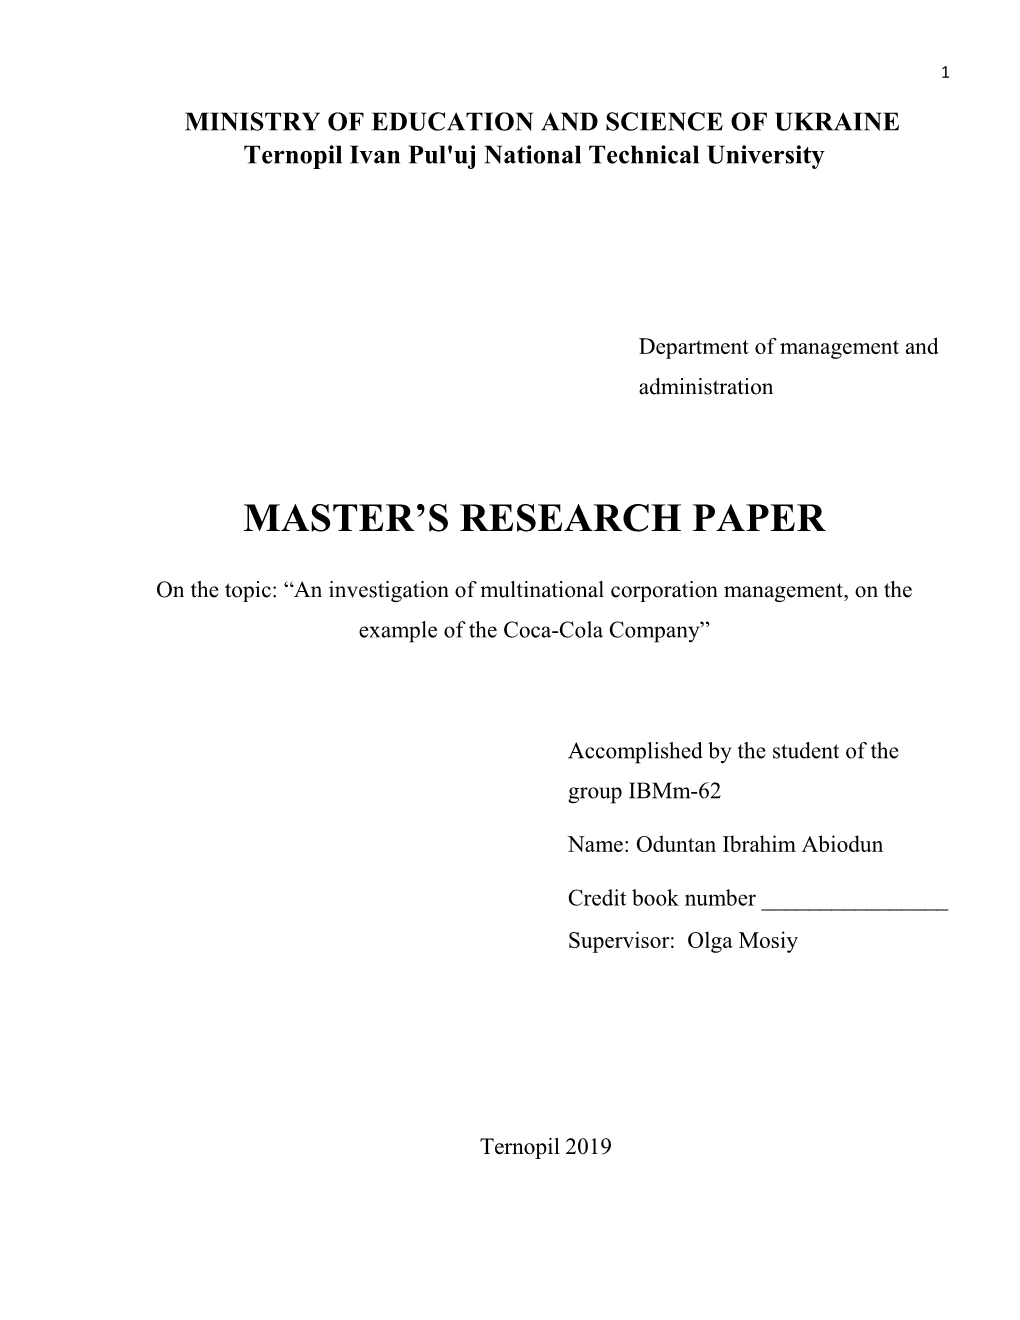 Master's Research Paper